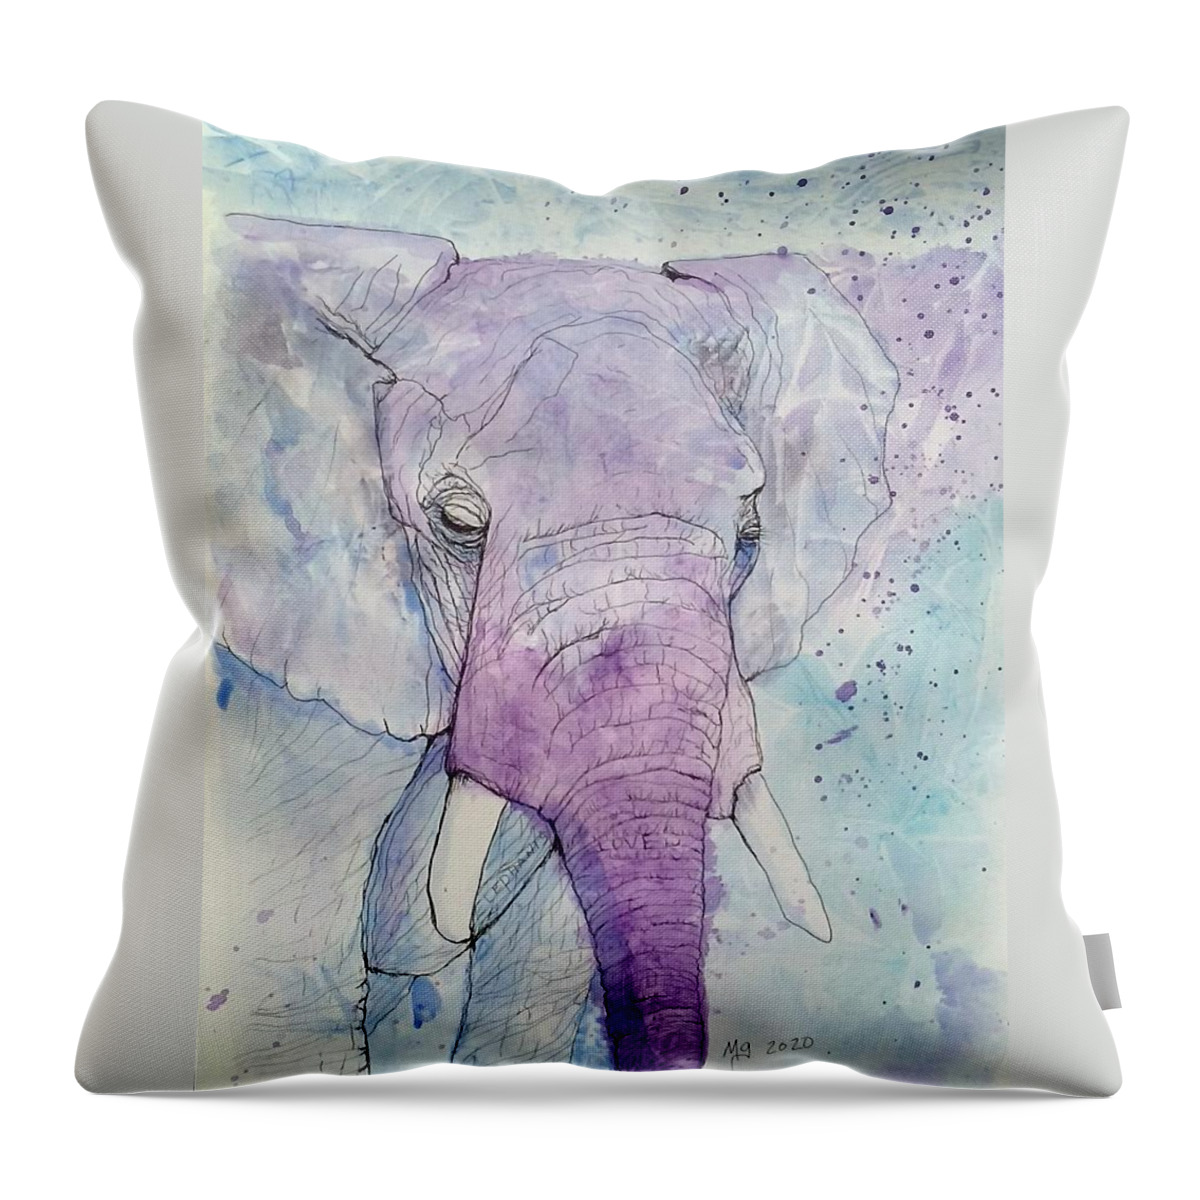 Elepant Throw Pillow featuring the painting Elephant by Mindy Gibbs